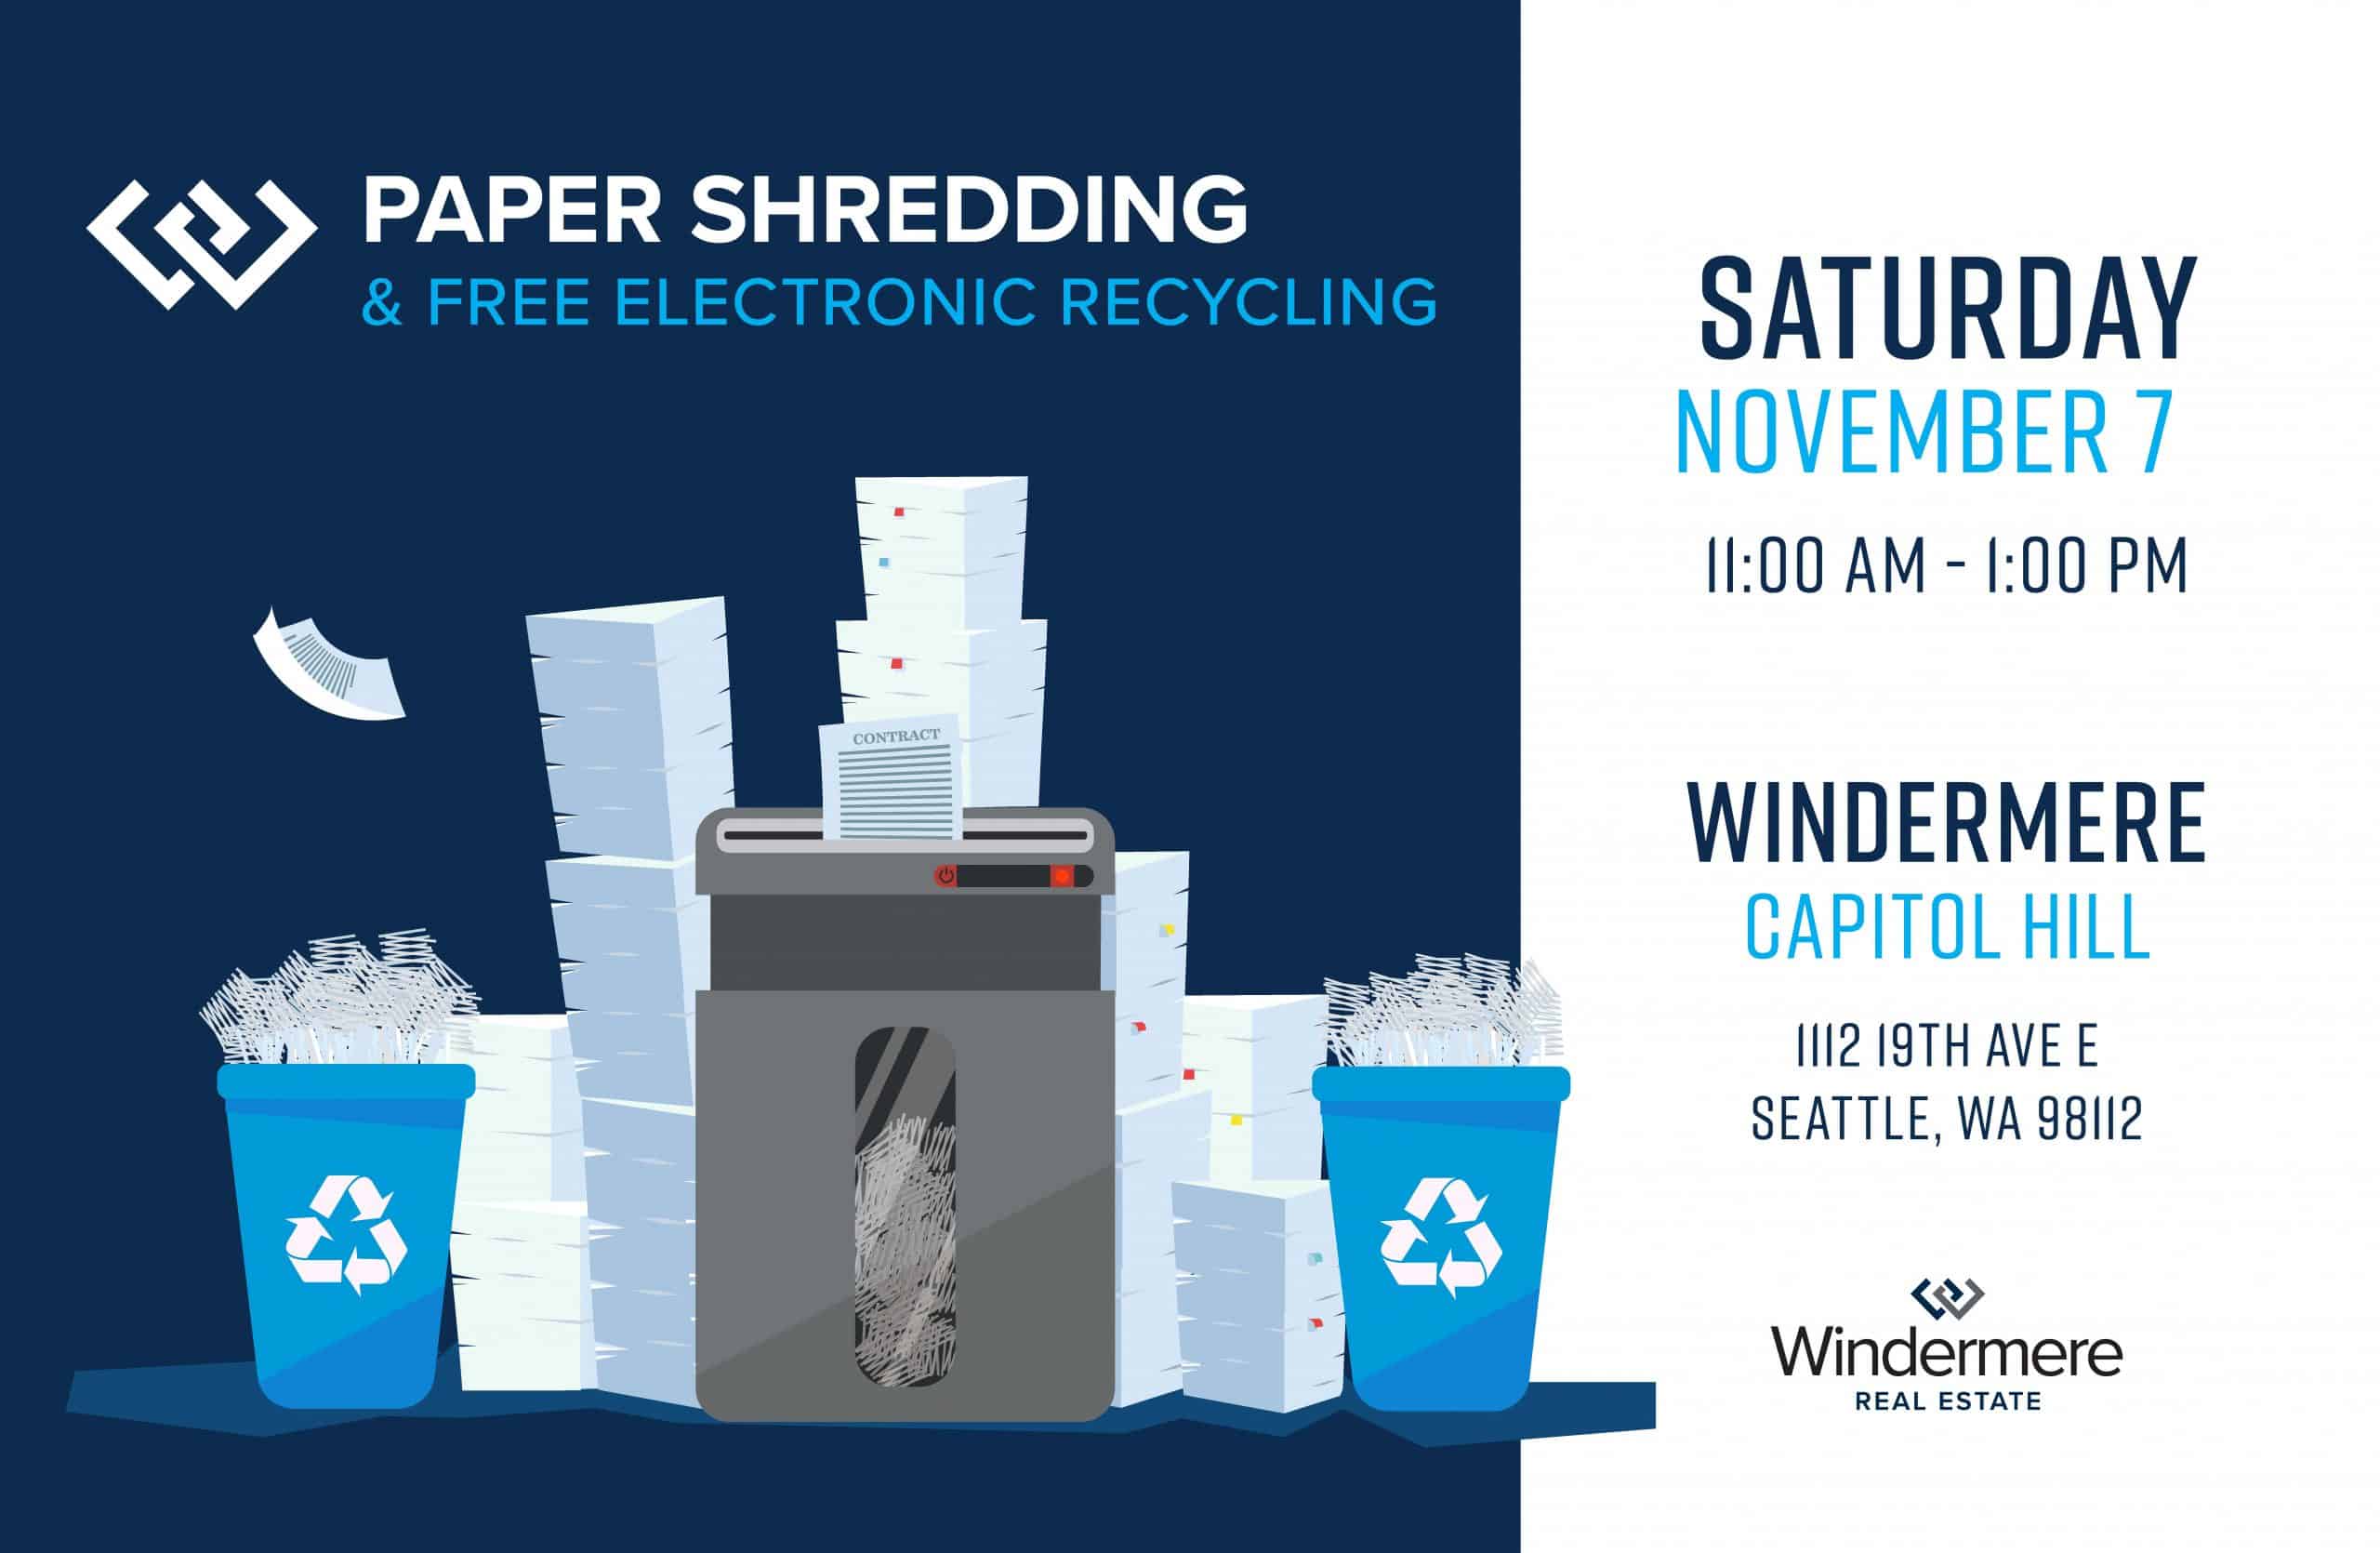 Free Document Shredding and Electronic Recycling Event 11/7